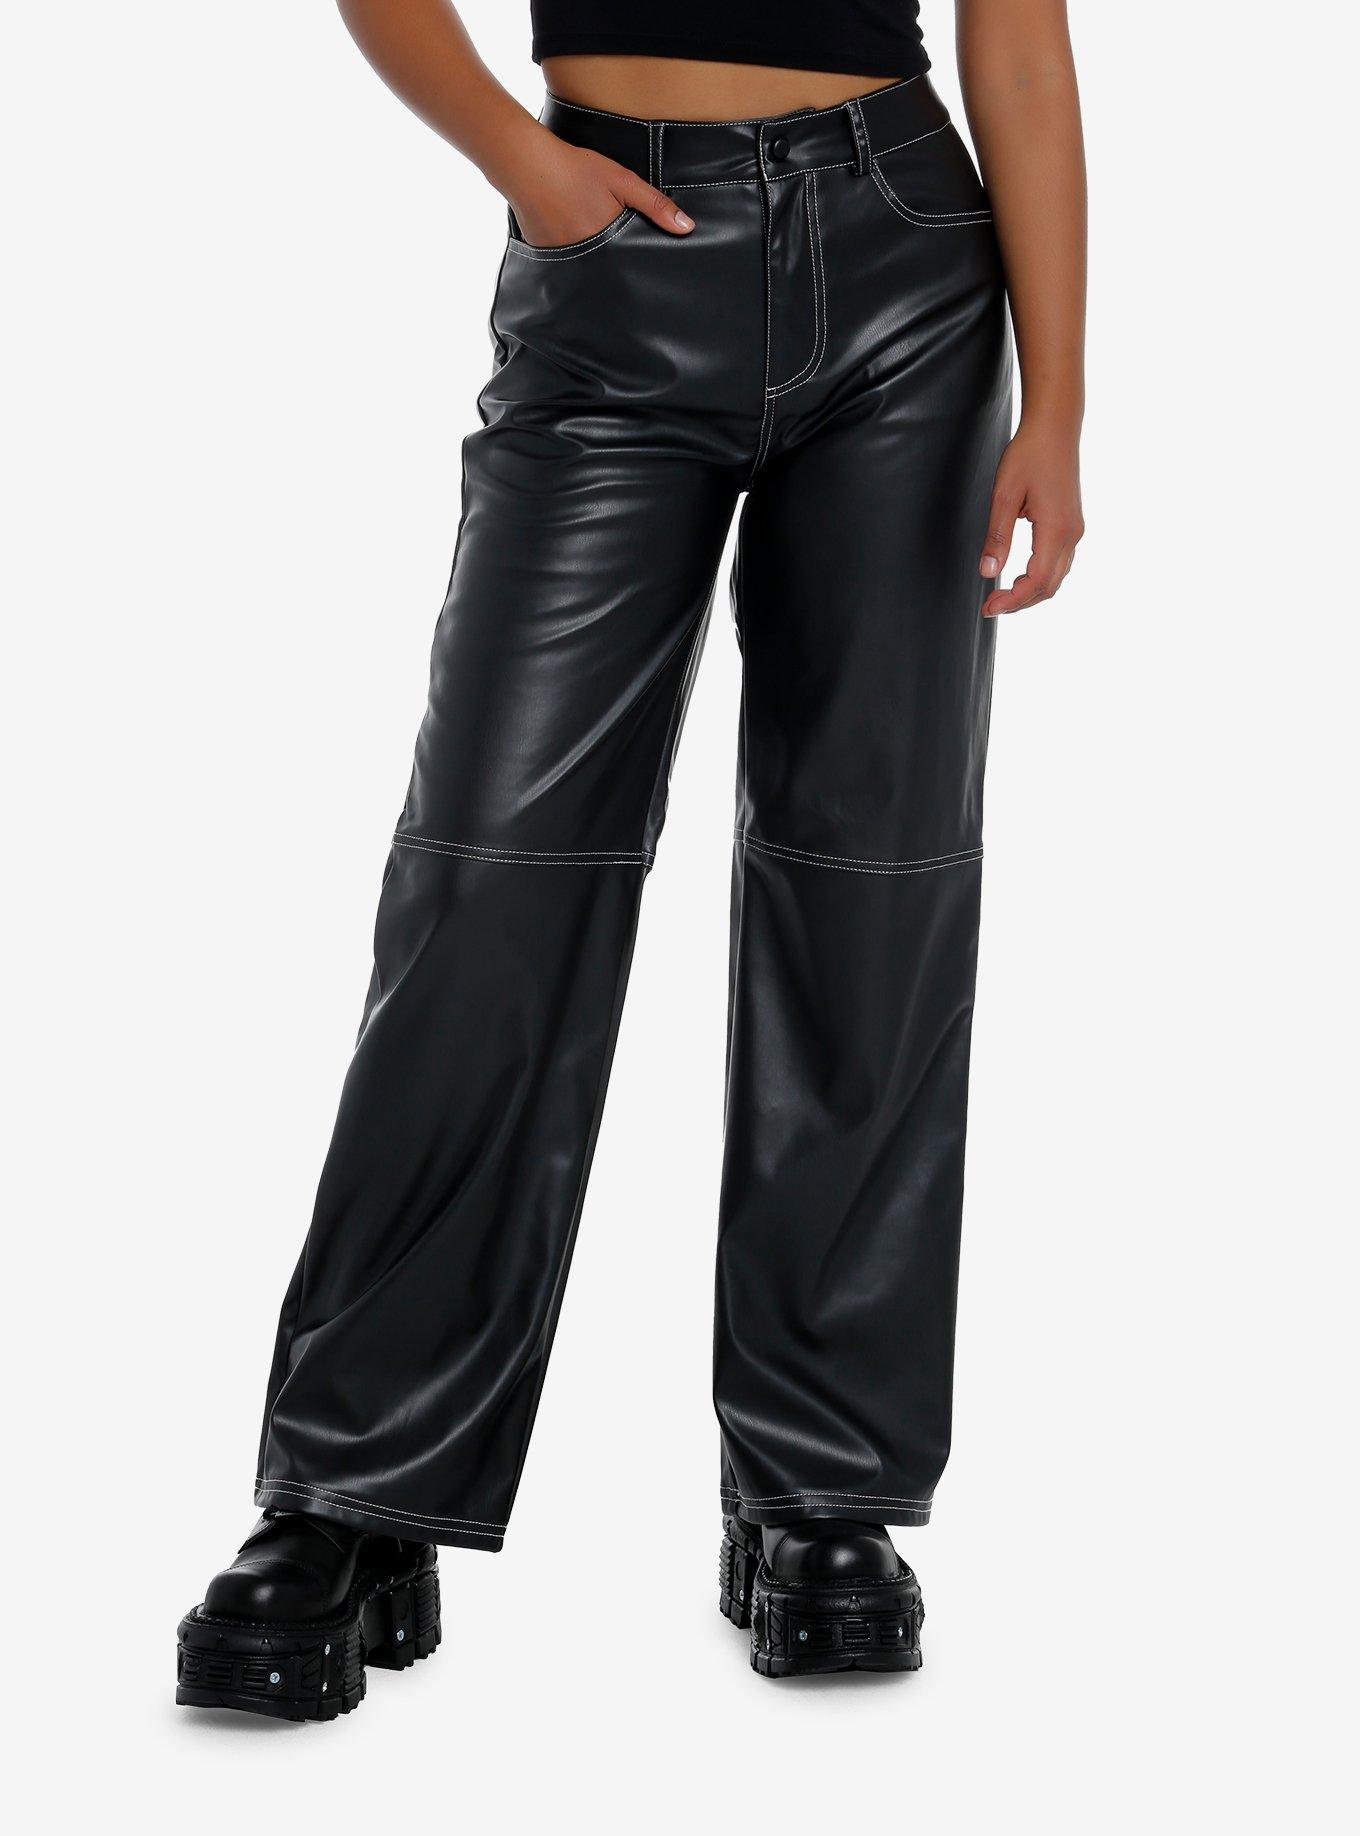 Black Faux Leather Pants | Hot Topic